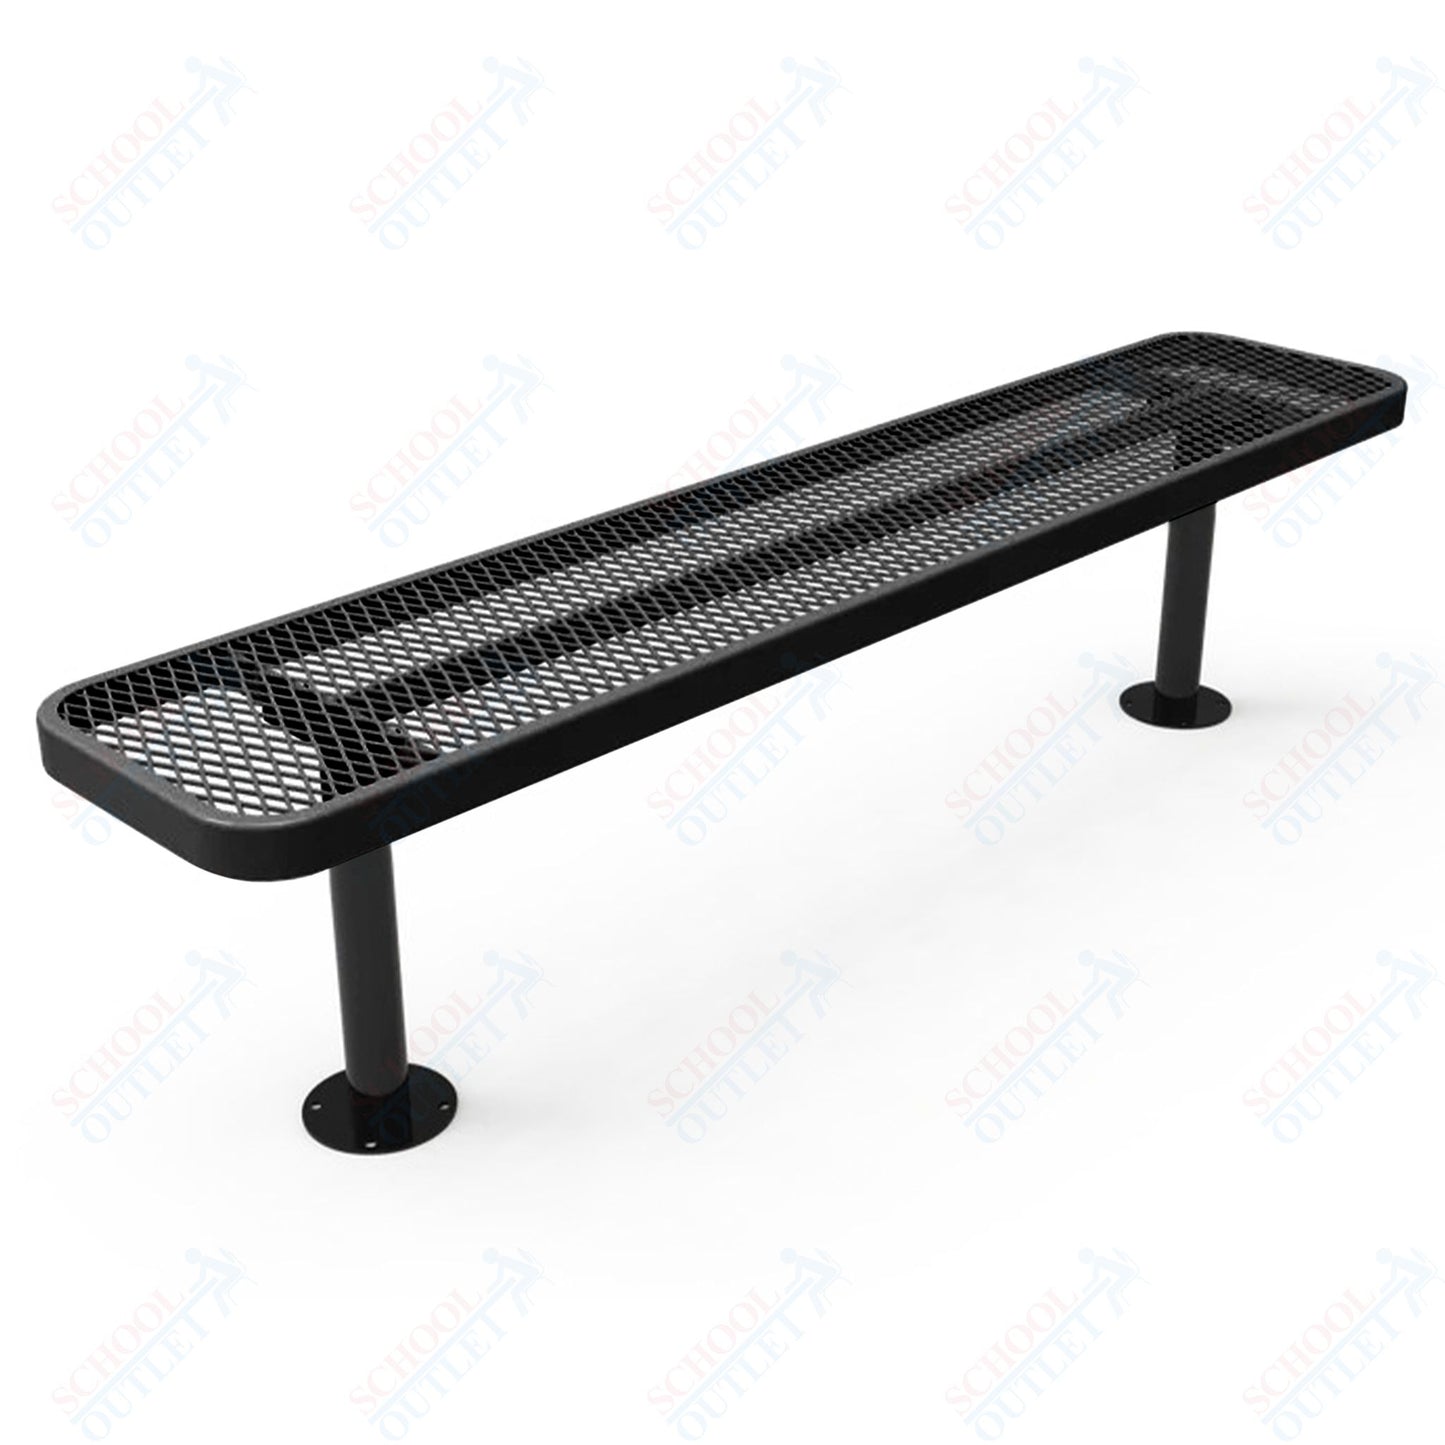 MyTcoat - Player's Outdoor Bench without Back - Surface Mount 8' L (MYT-BPY08-35)